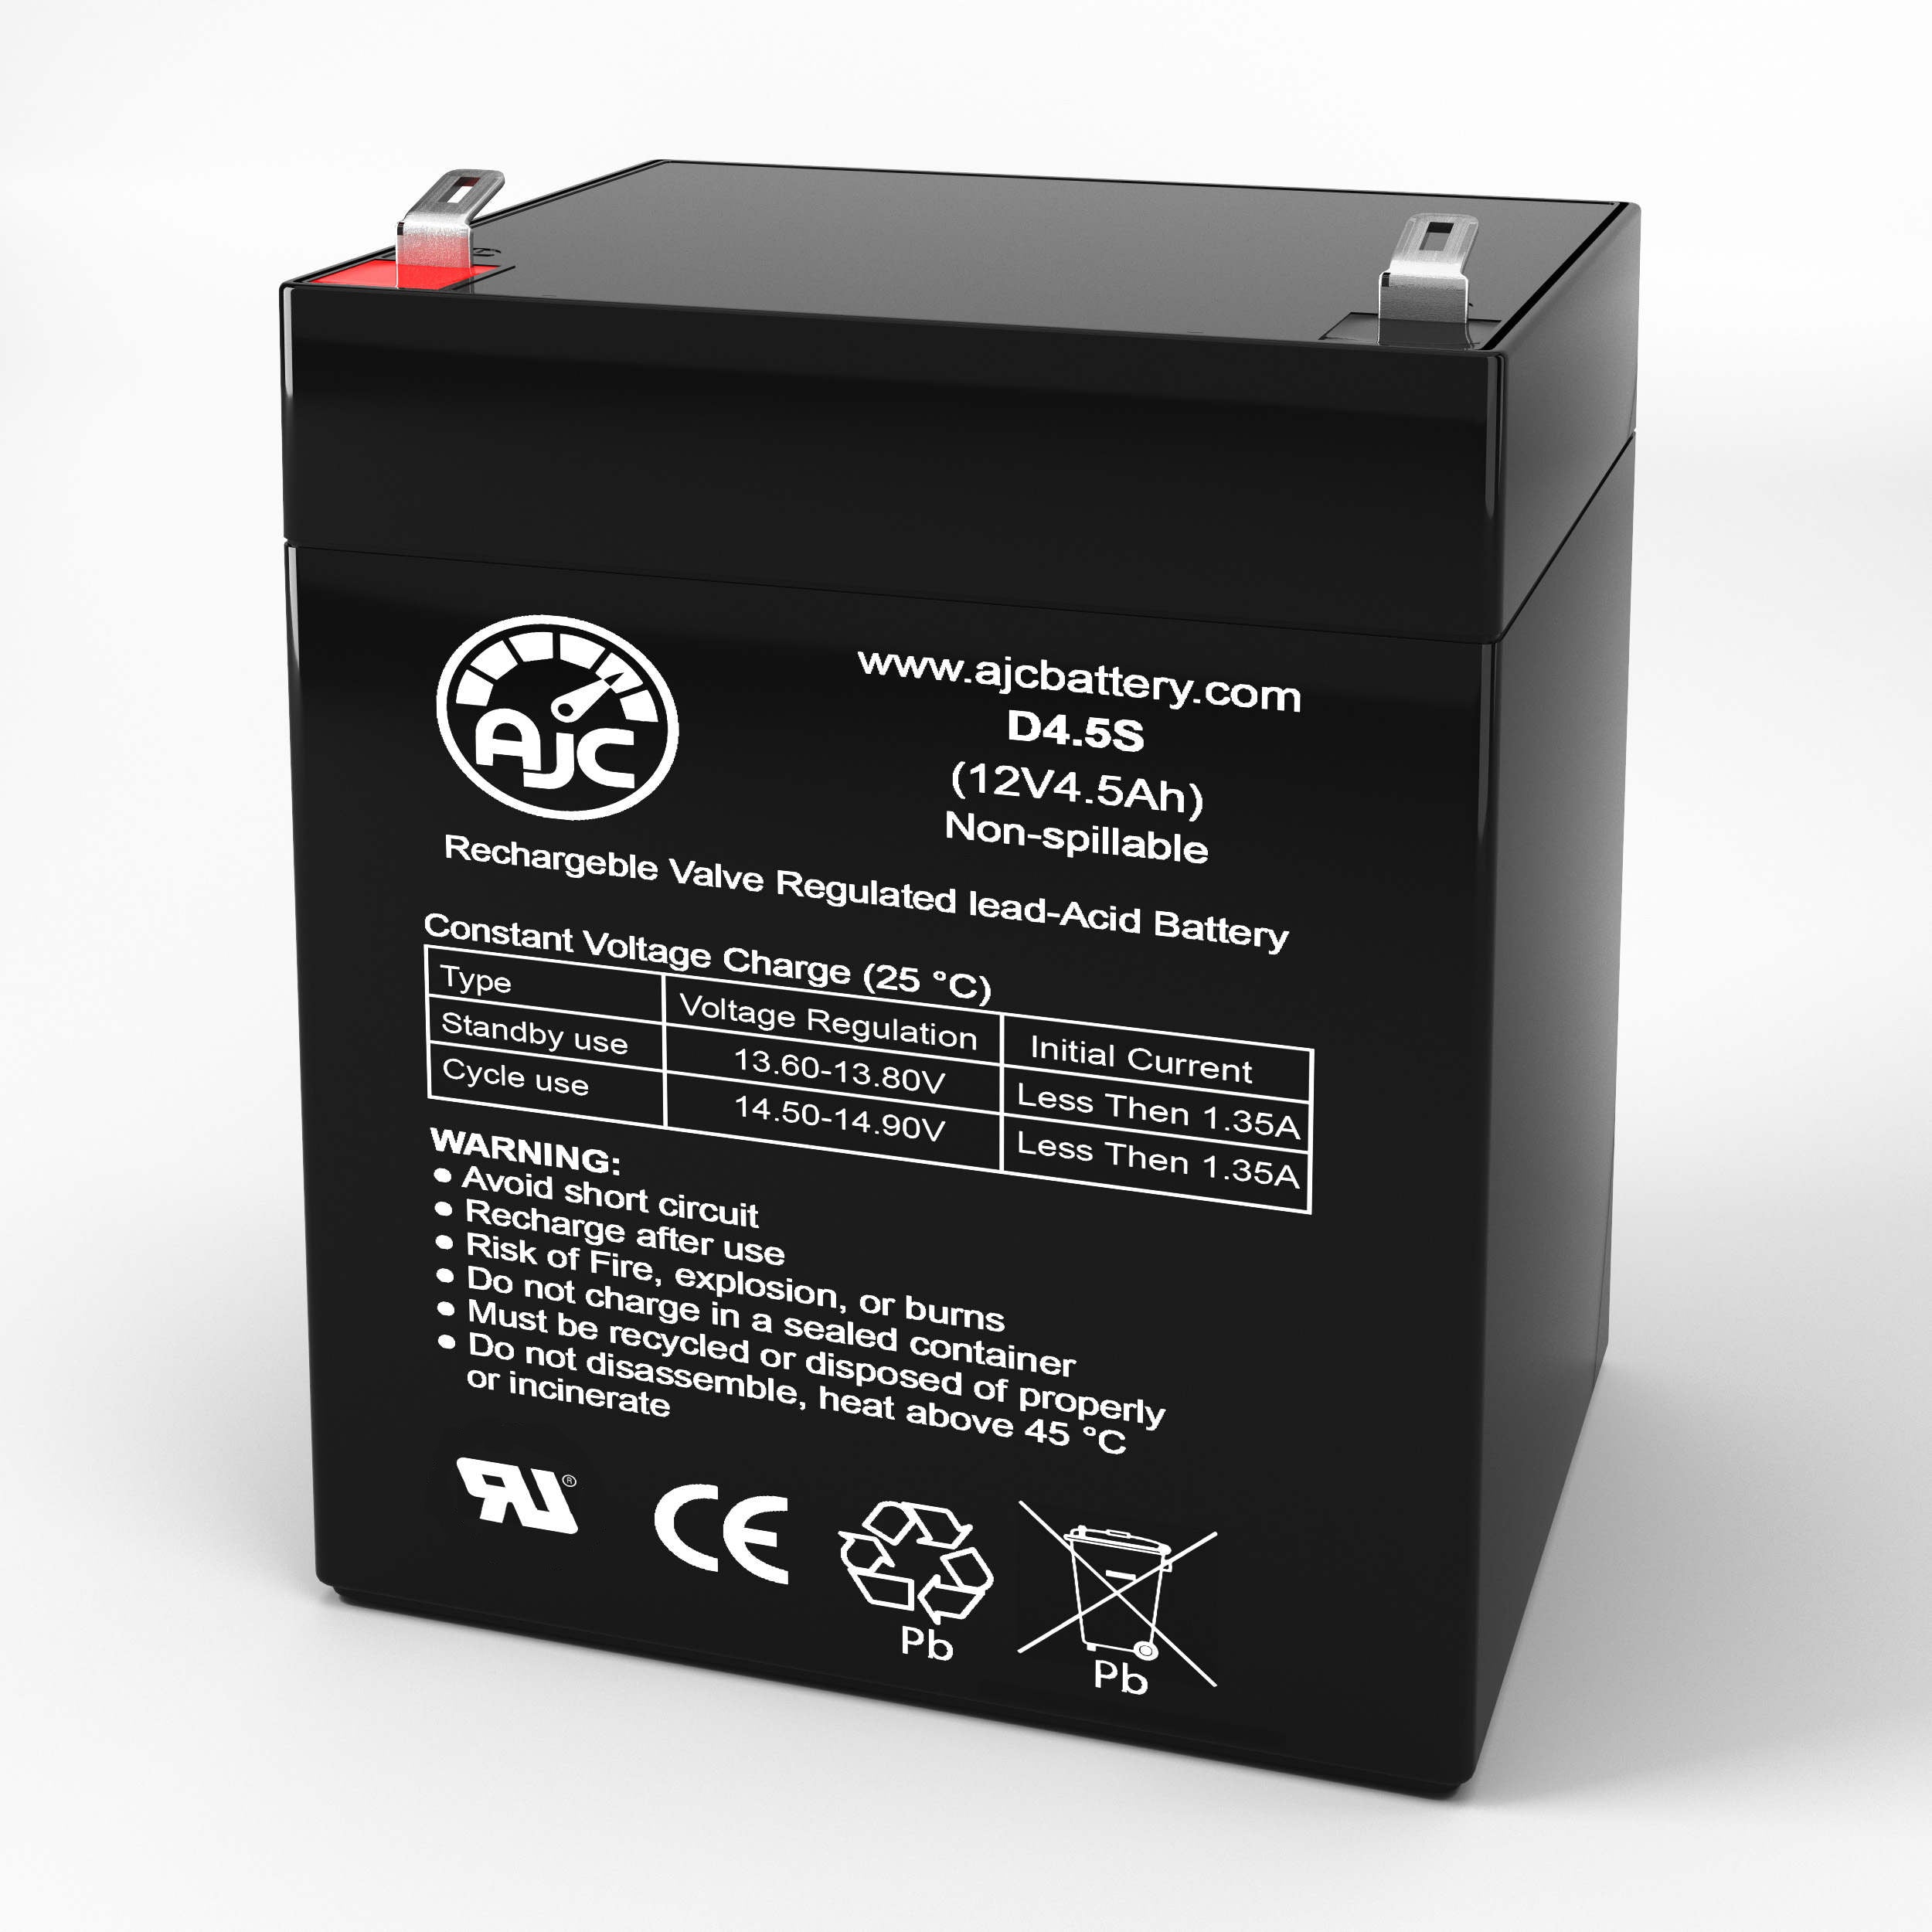 Universal Power Group UB1250 Replaces 4Ah 12V 4.5Ah Mobility Scooter Battery - This Is an AJC Brand Replacement - image 1 of 6